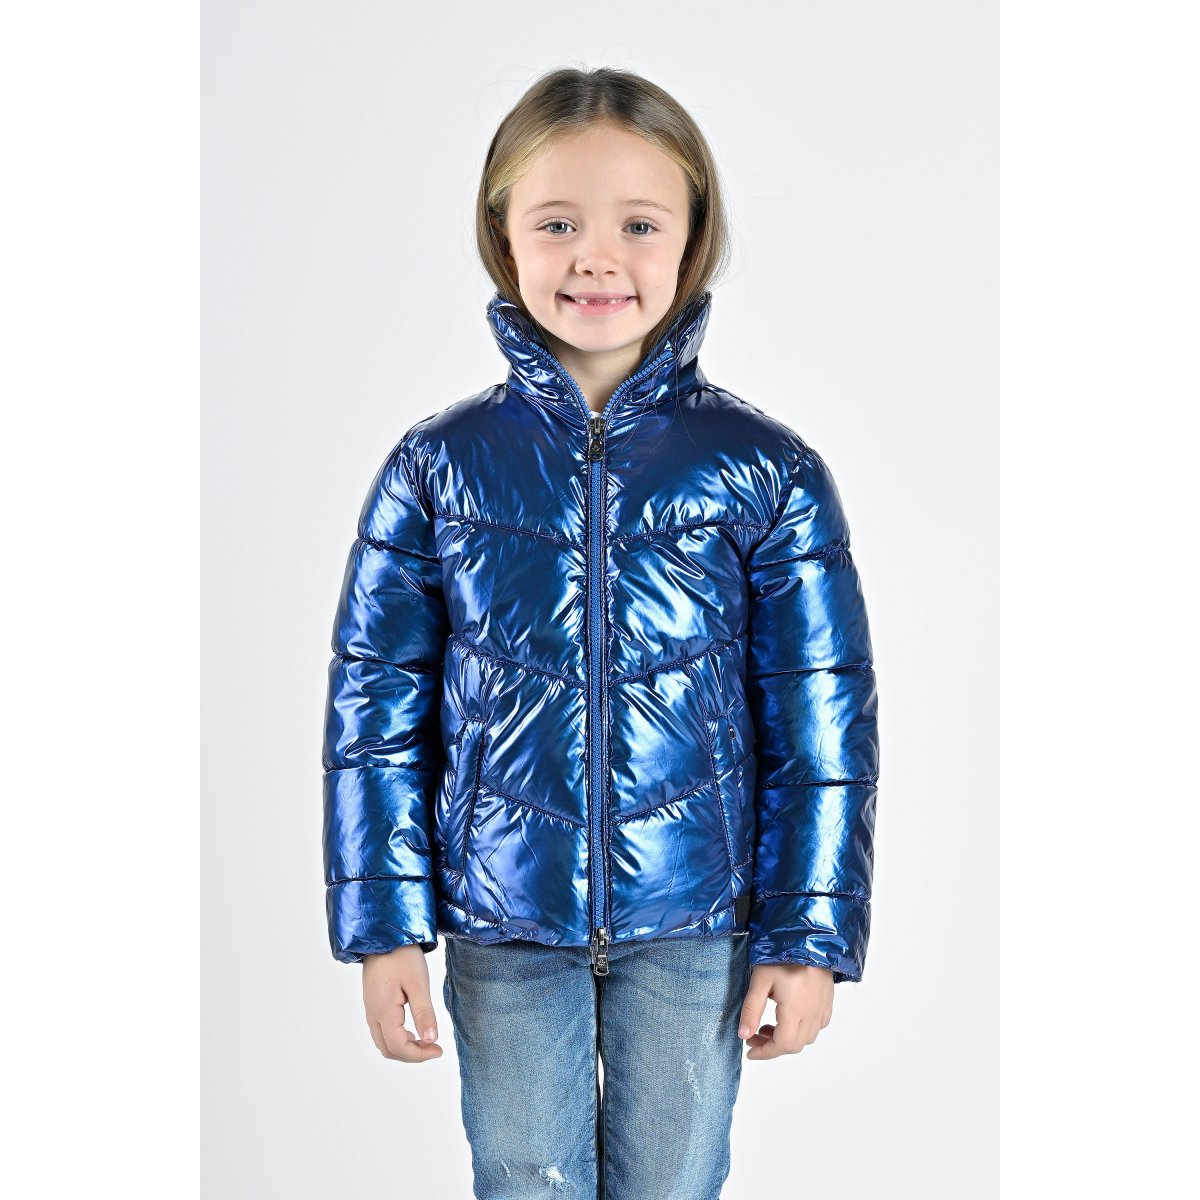 Mauricie Kid Recycled Glam